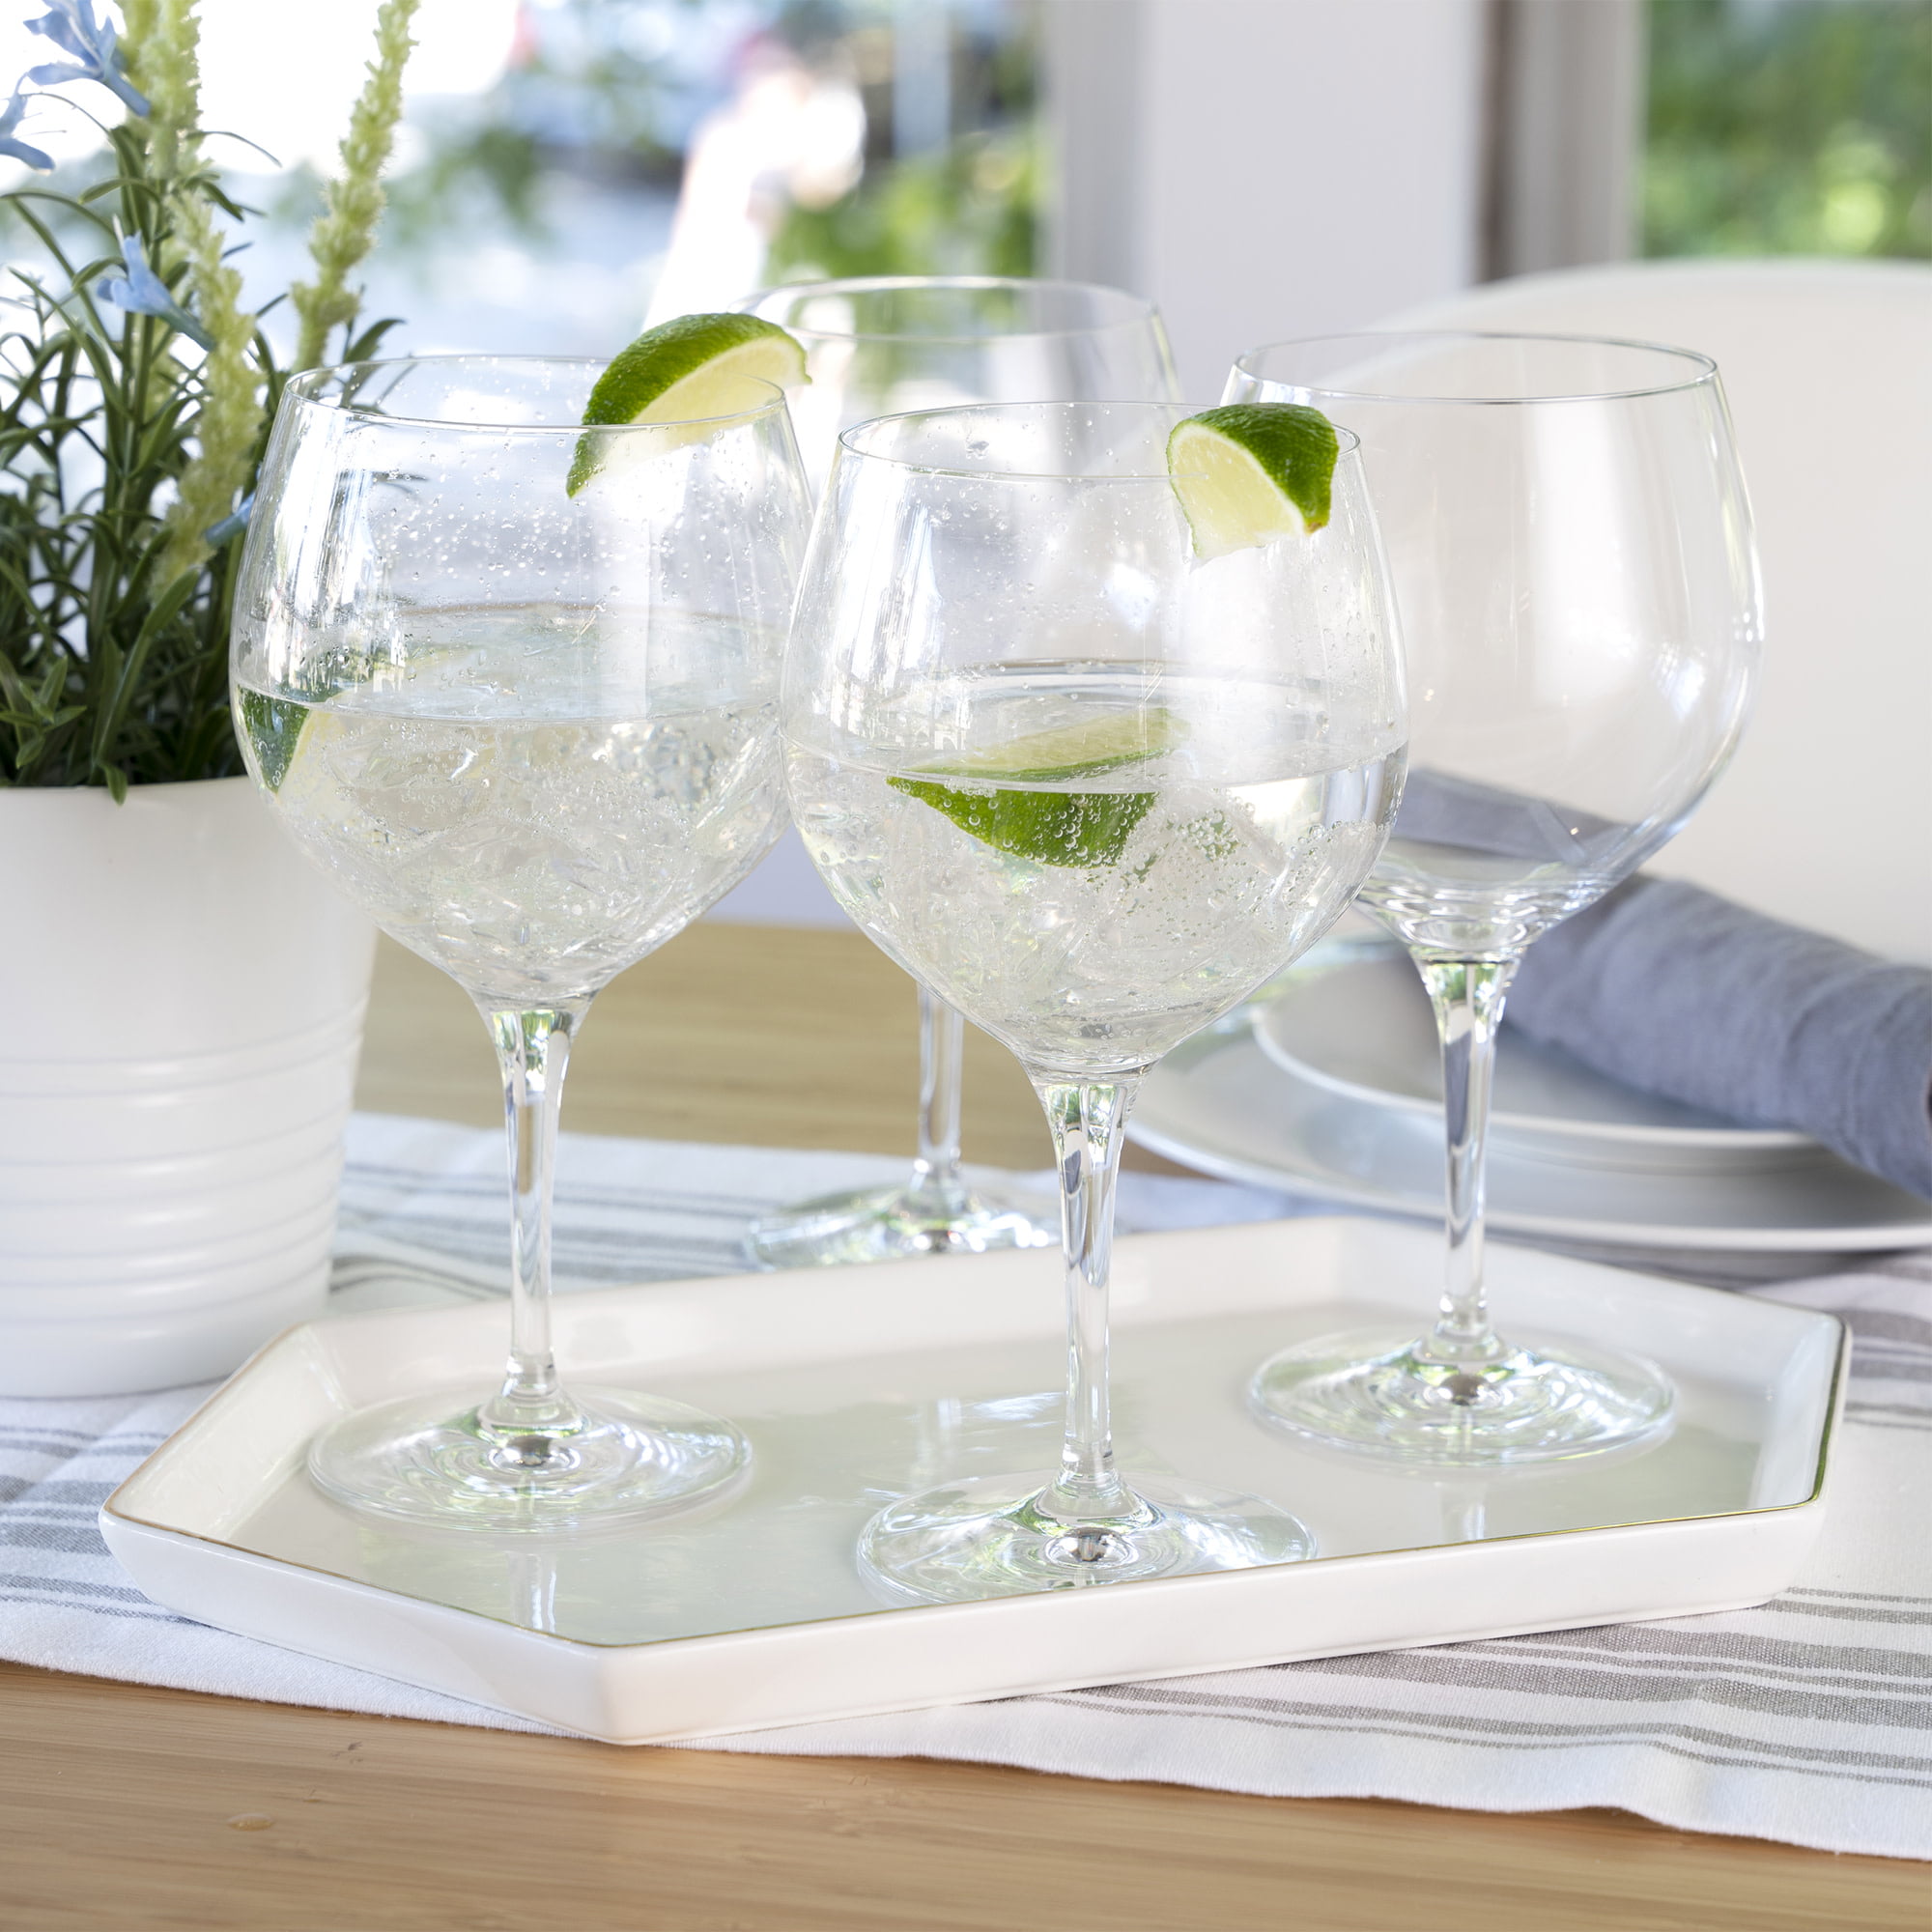 Verdensrekord Guinness Book Lappe pas Spiegelau Special Gin and Tonic Glasses Set of 4 - European-Made Crystal,  Modern Cocktail Glassware, Dishwasher Safe, Professional Quality Cocktail  Glass Gift Set - 21 oz - Walmart.com